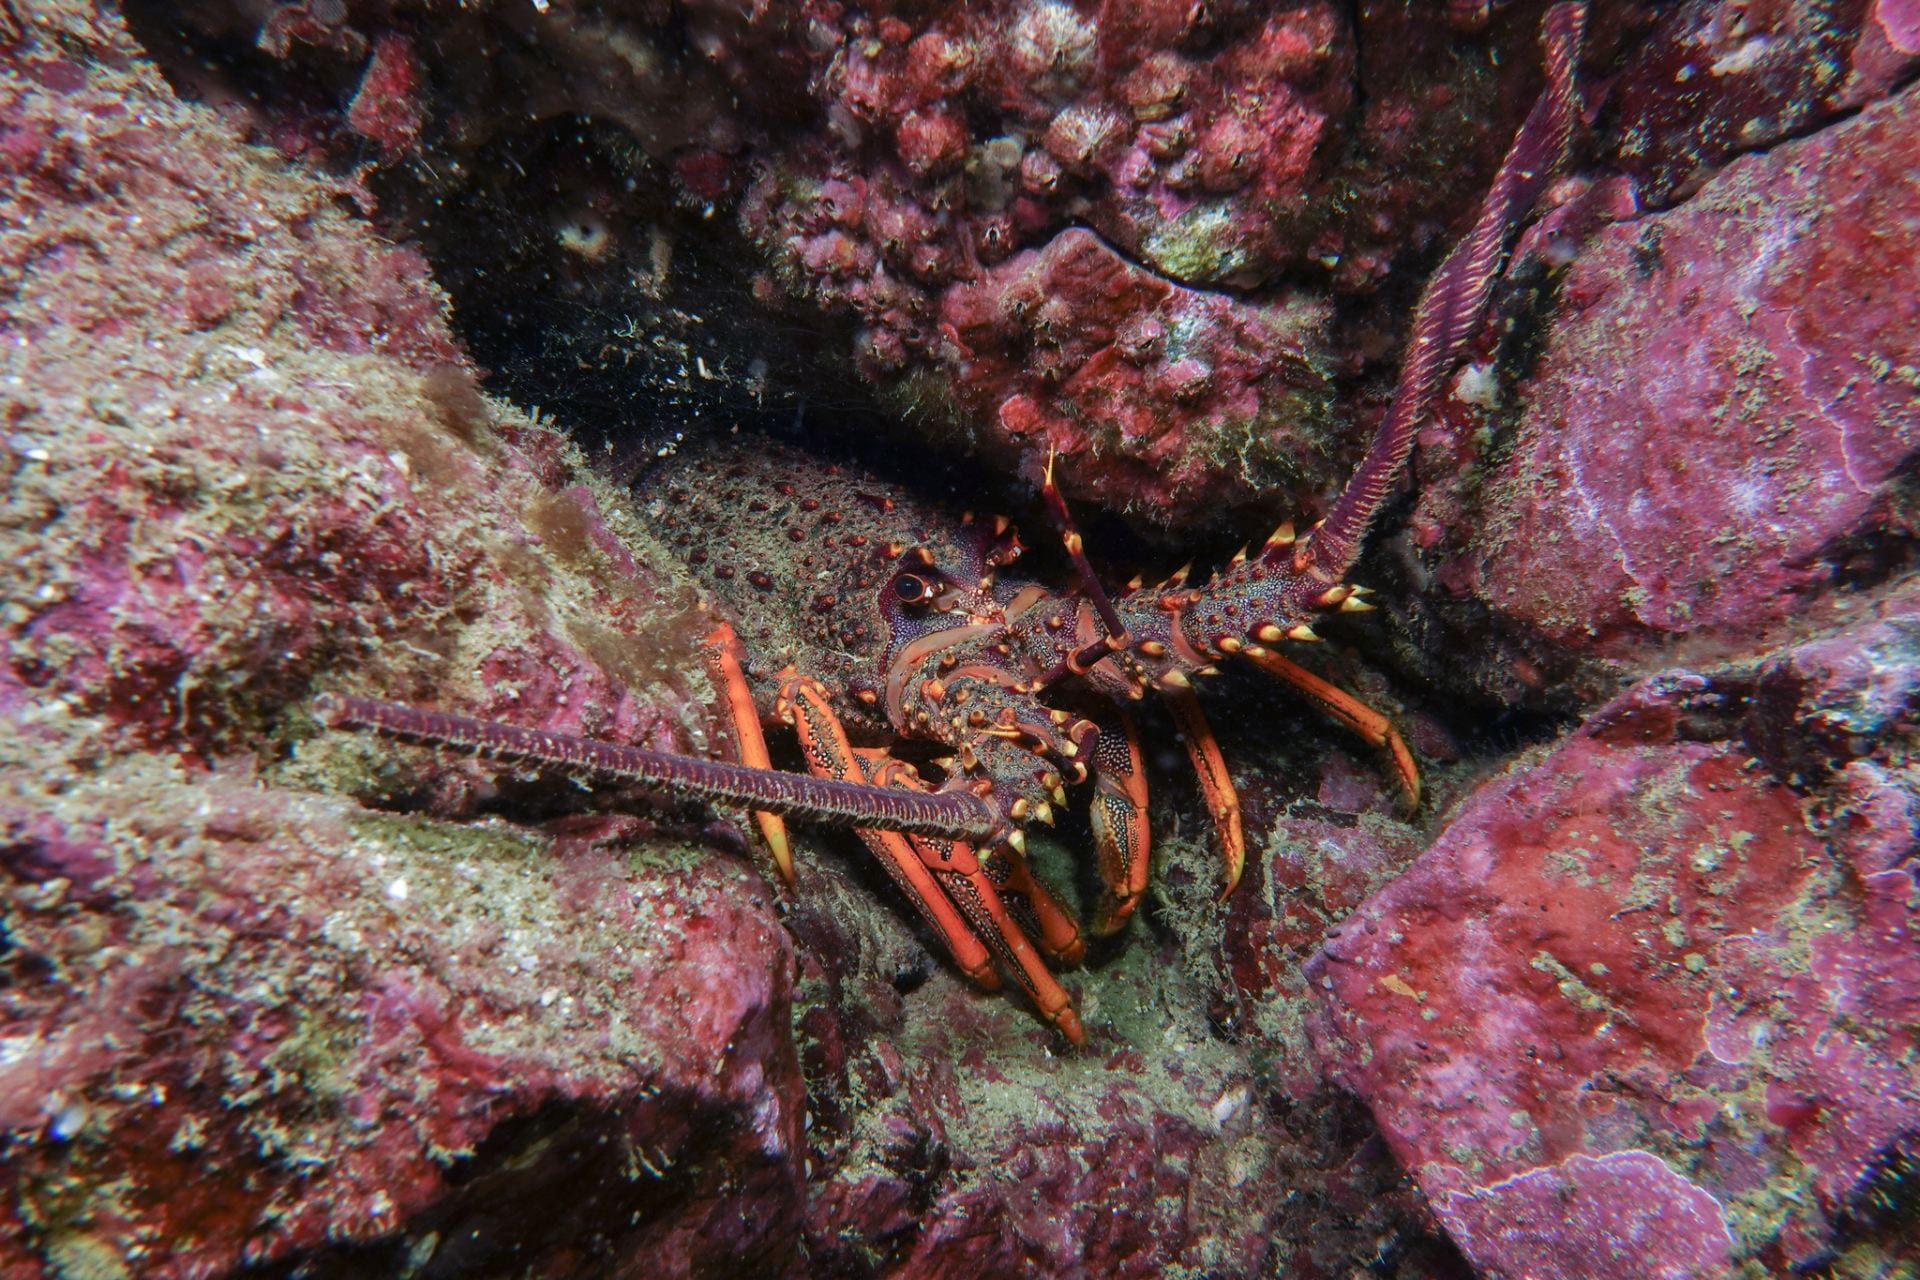 A rock lobster hiding in a rock crevice. The rocks are pink and covered with algae